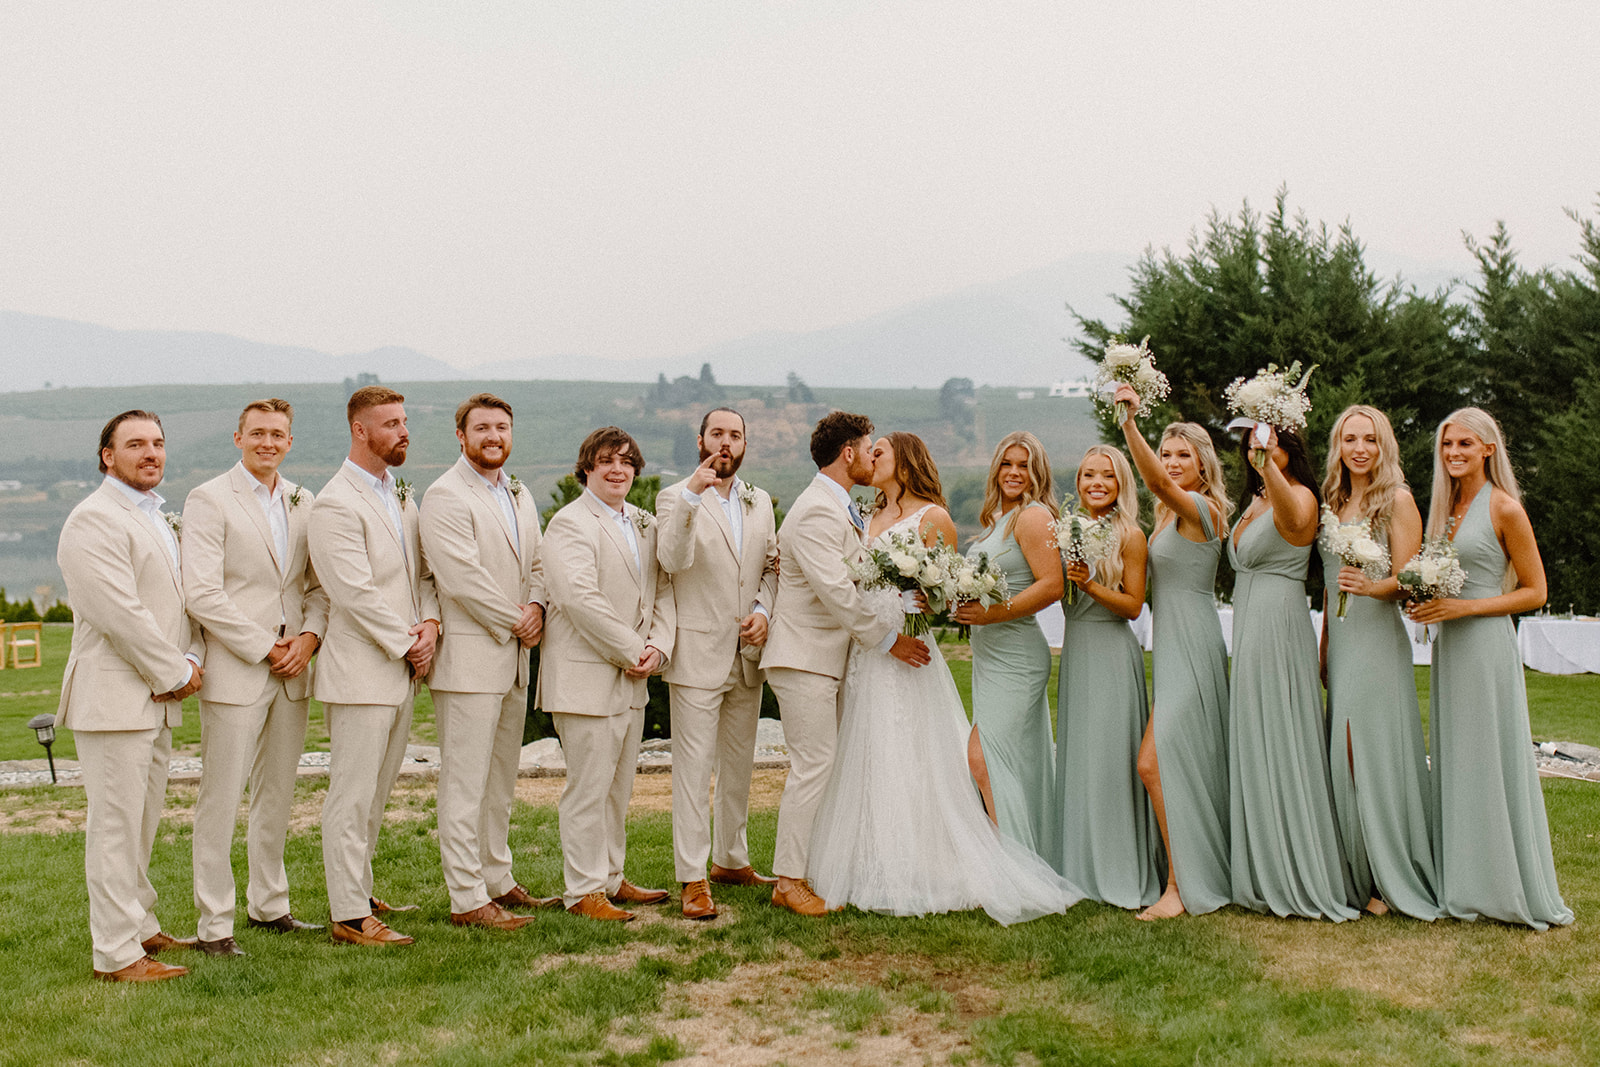 Bride and groom photos with bridal party